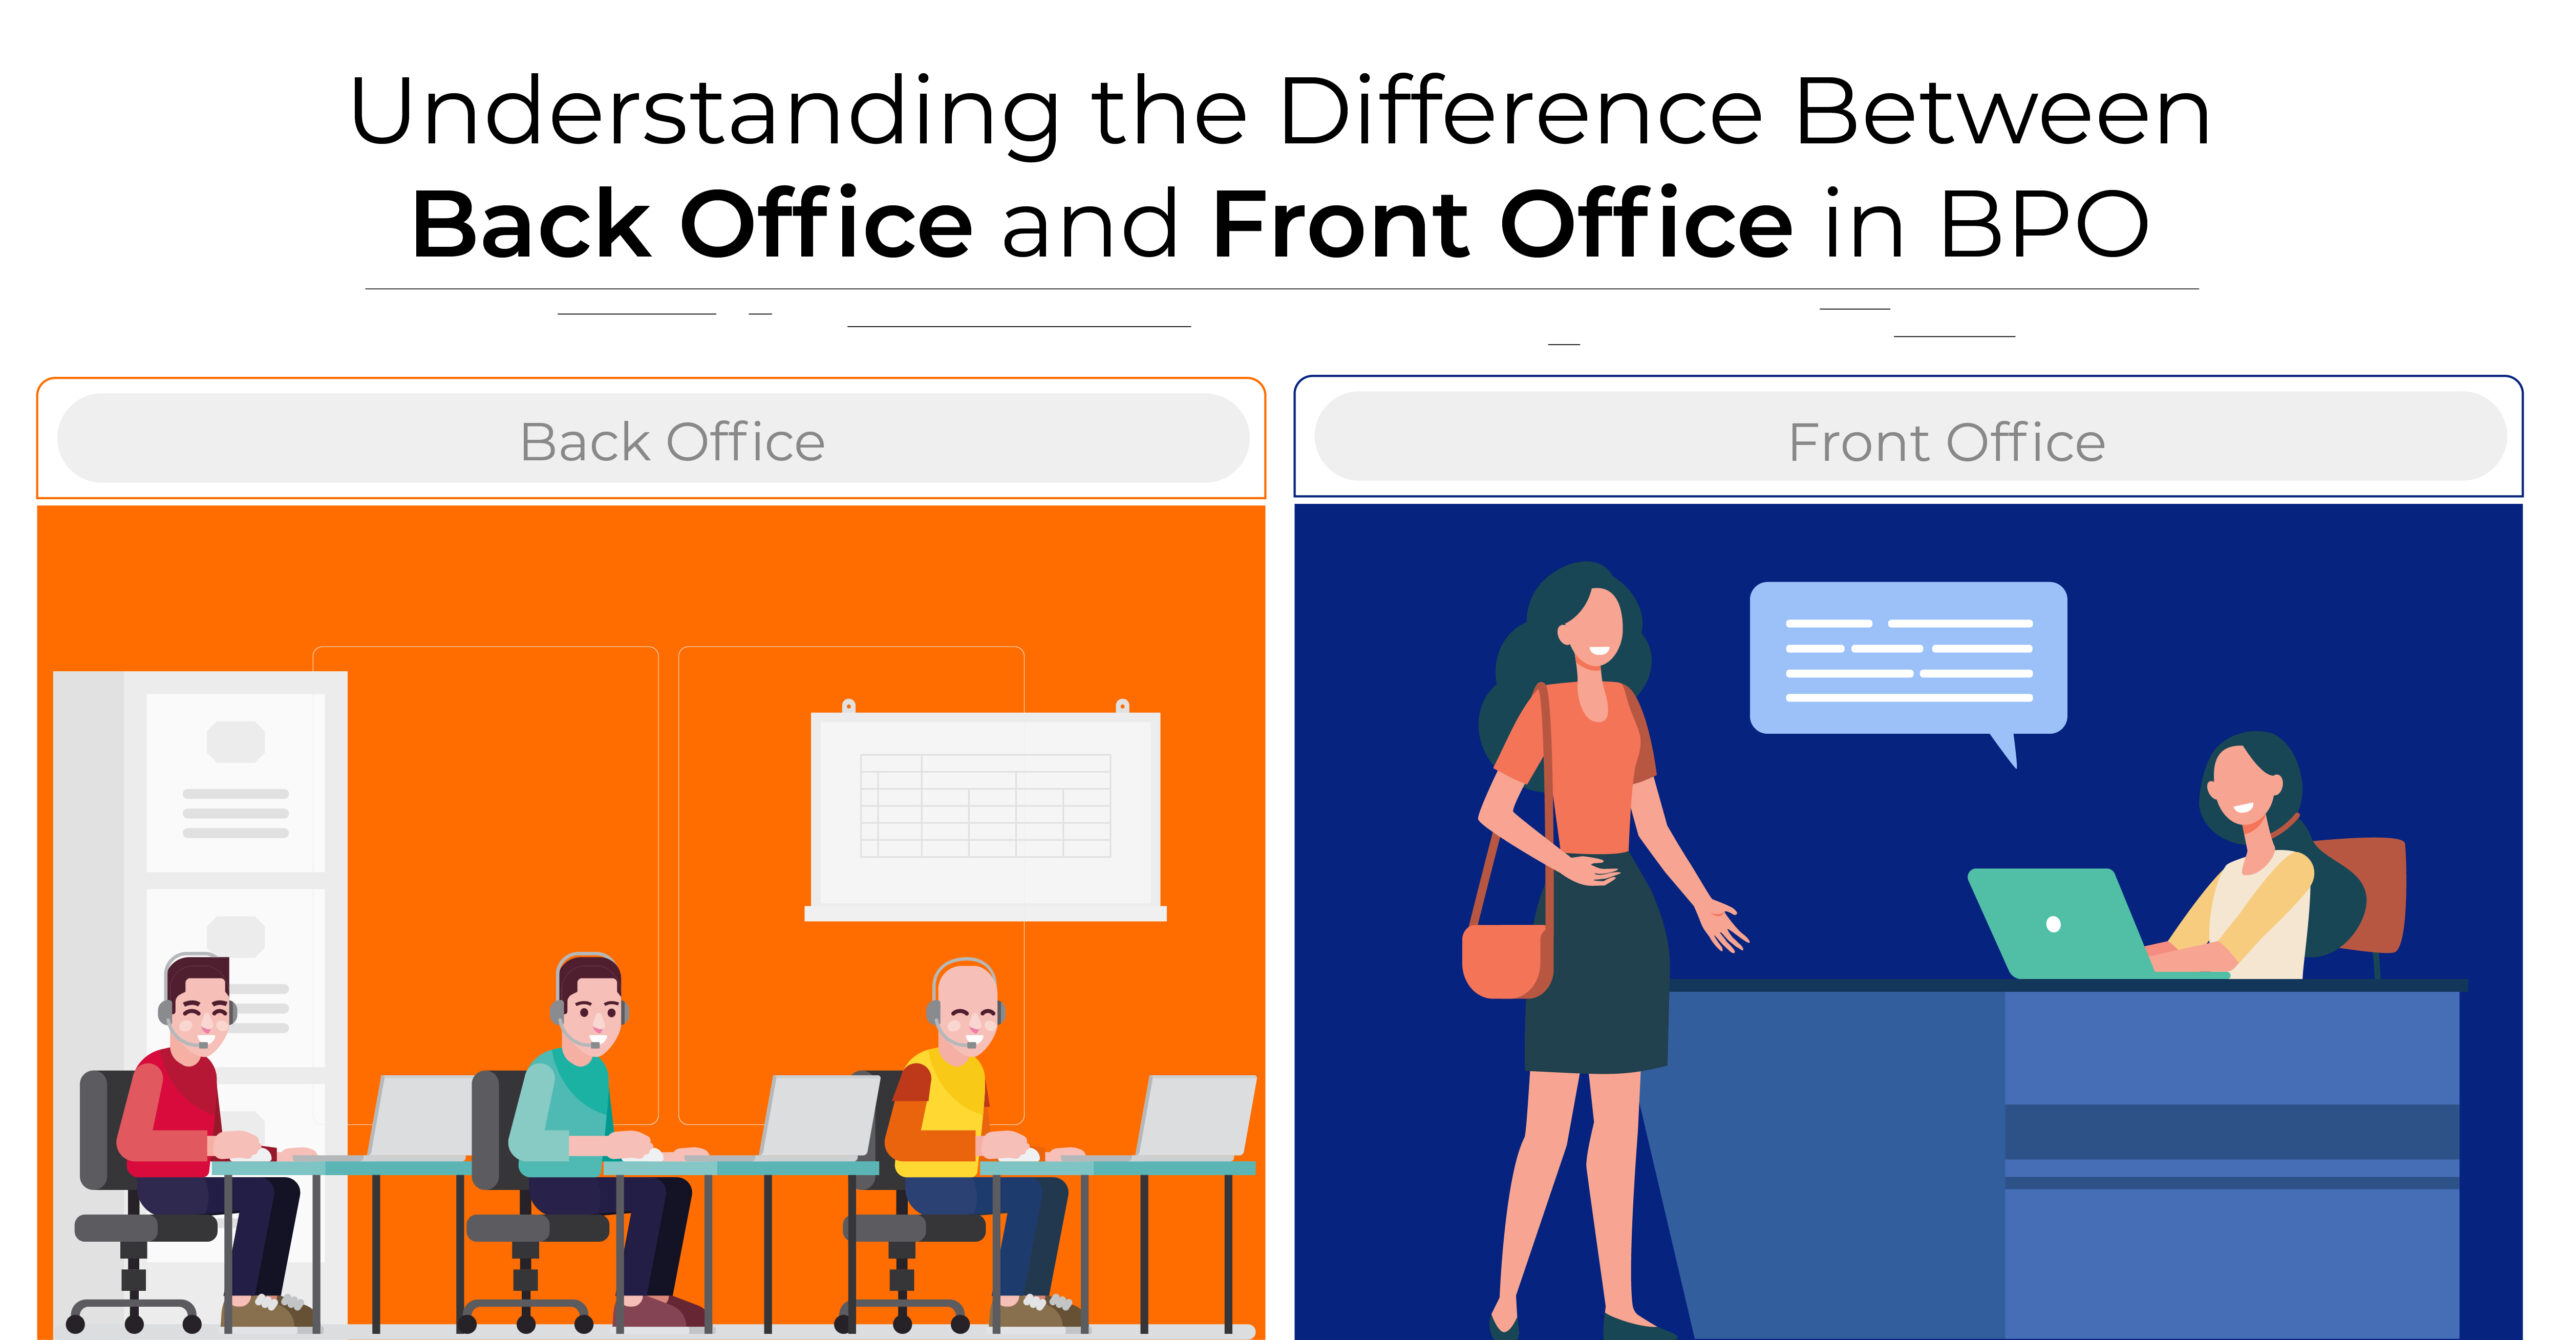 Front Office: Definition, Duties, Front Office vs. Back Office